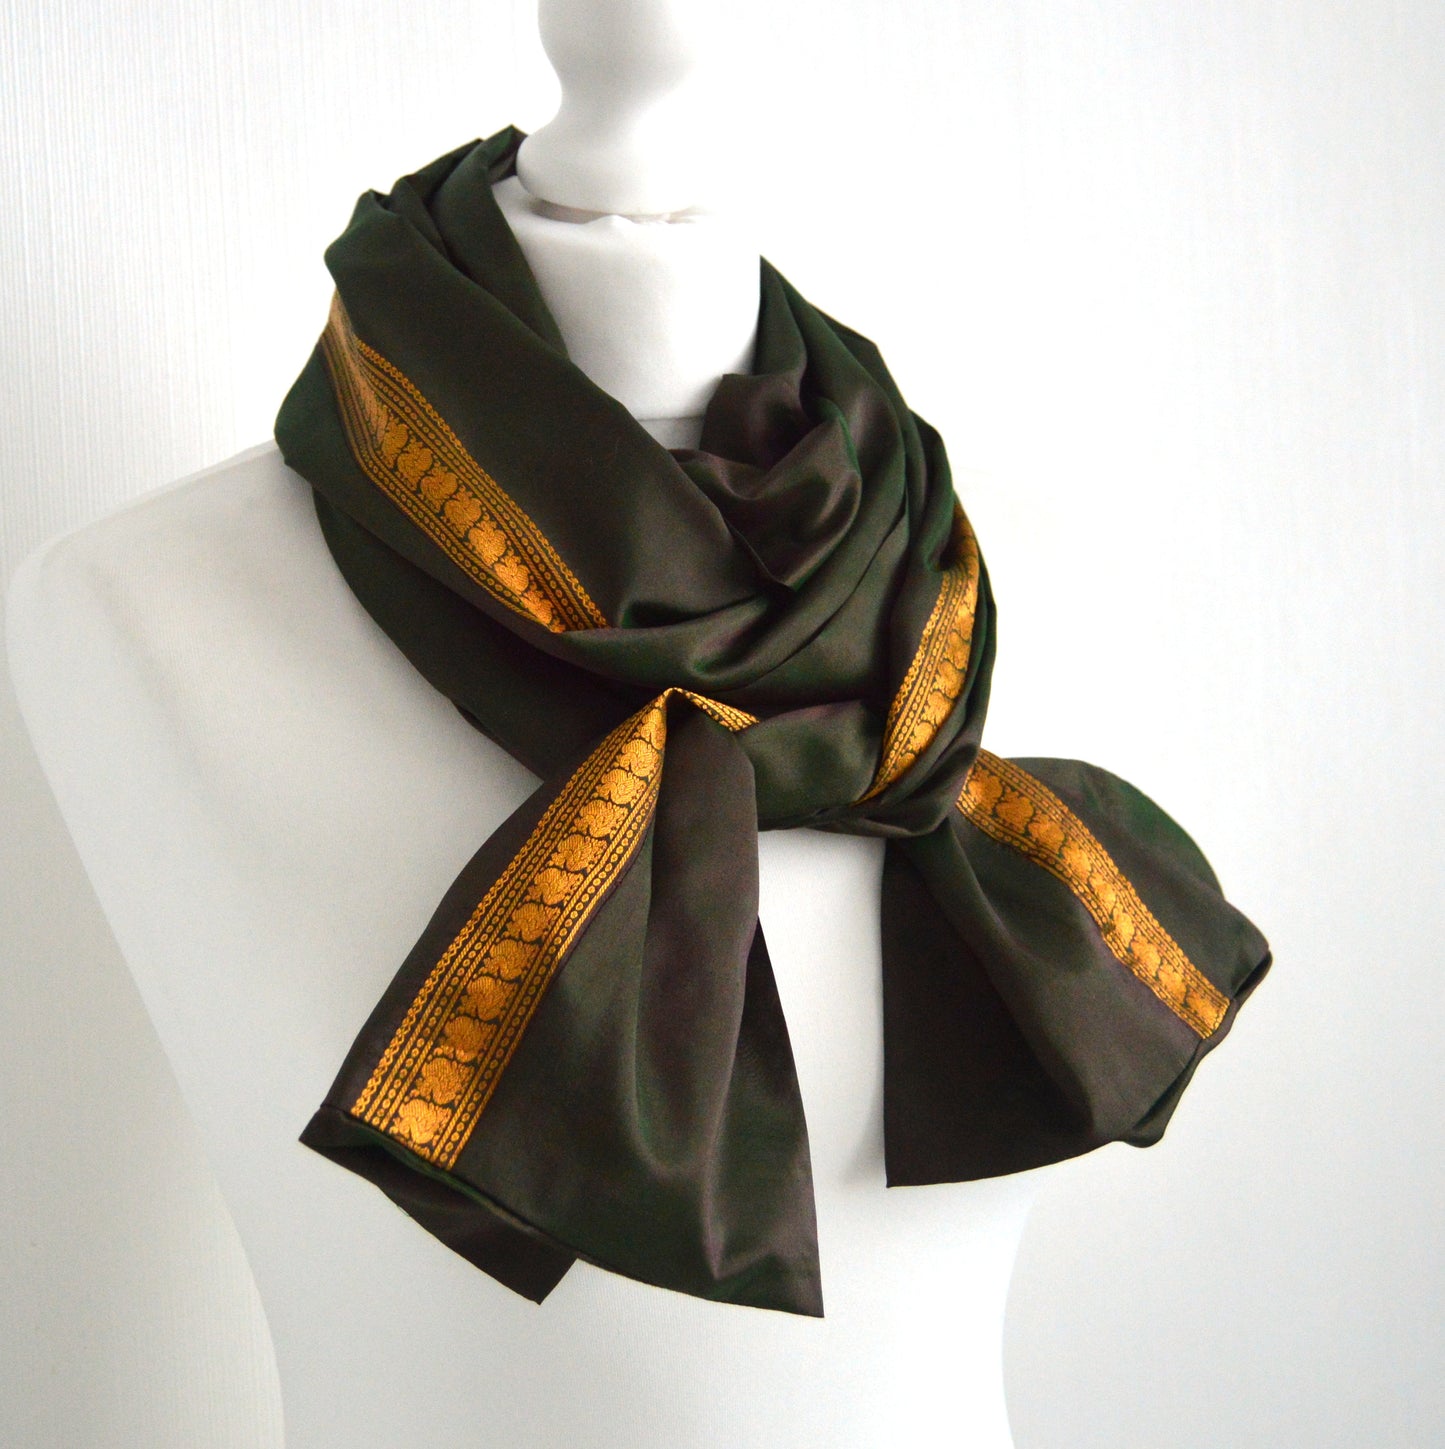 Olive Tonic Upcycled Vintage Sari Silk Scarf - Bohemian Autumn Fall Winter Unisex Womens Scarf - Eco Friendly Christmas Gift for Her or Him